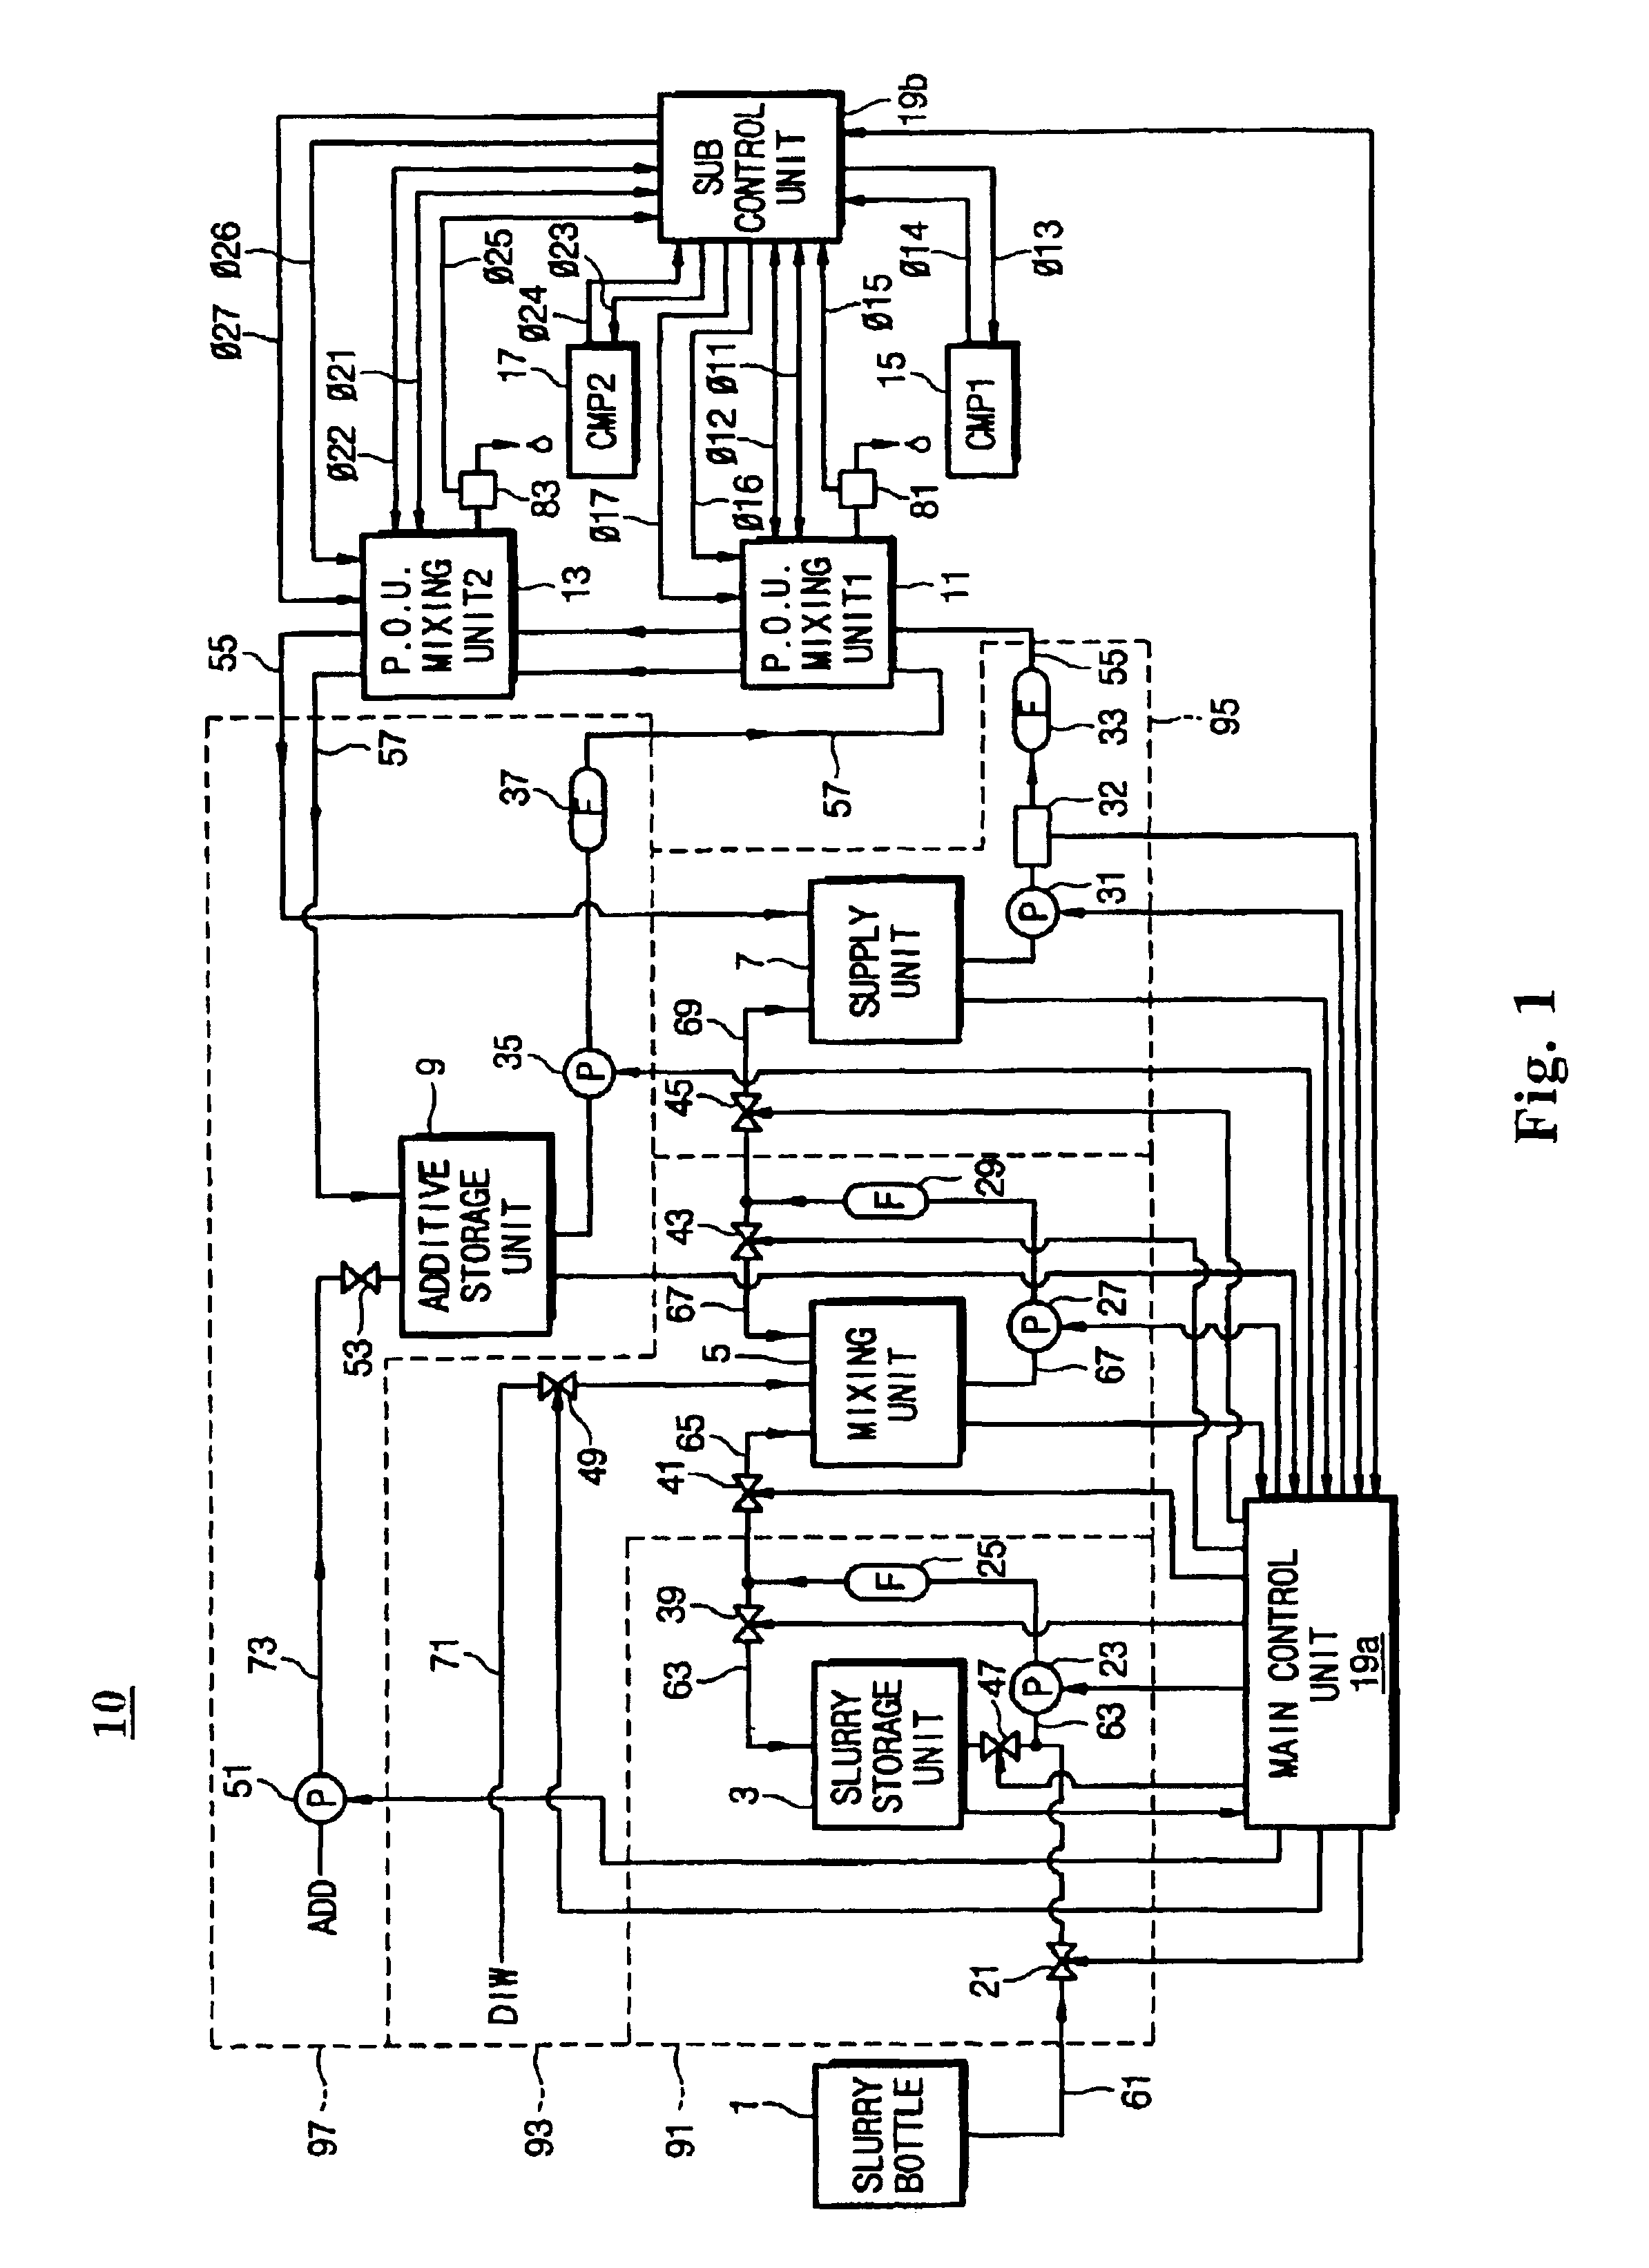 Method of supplying slurry and a slurry supply apparatus having a mixing unit at a point of use